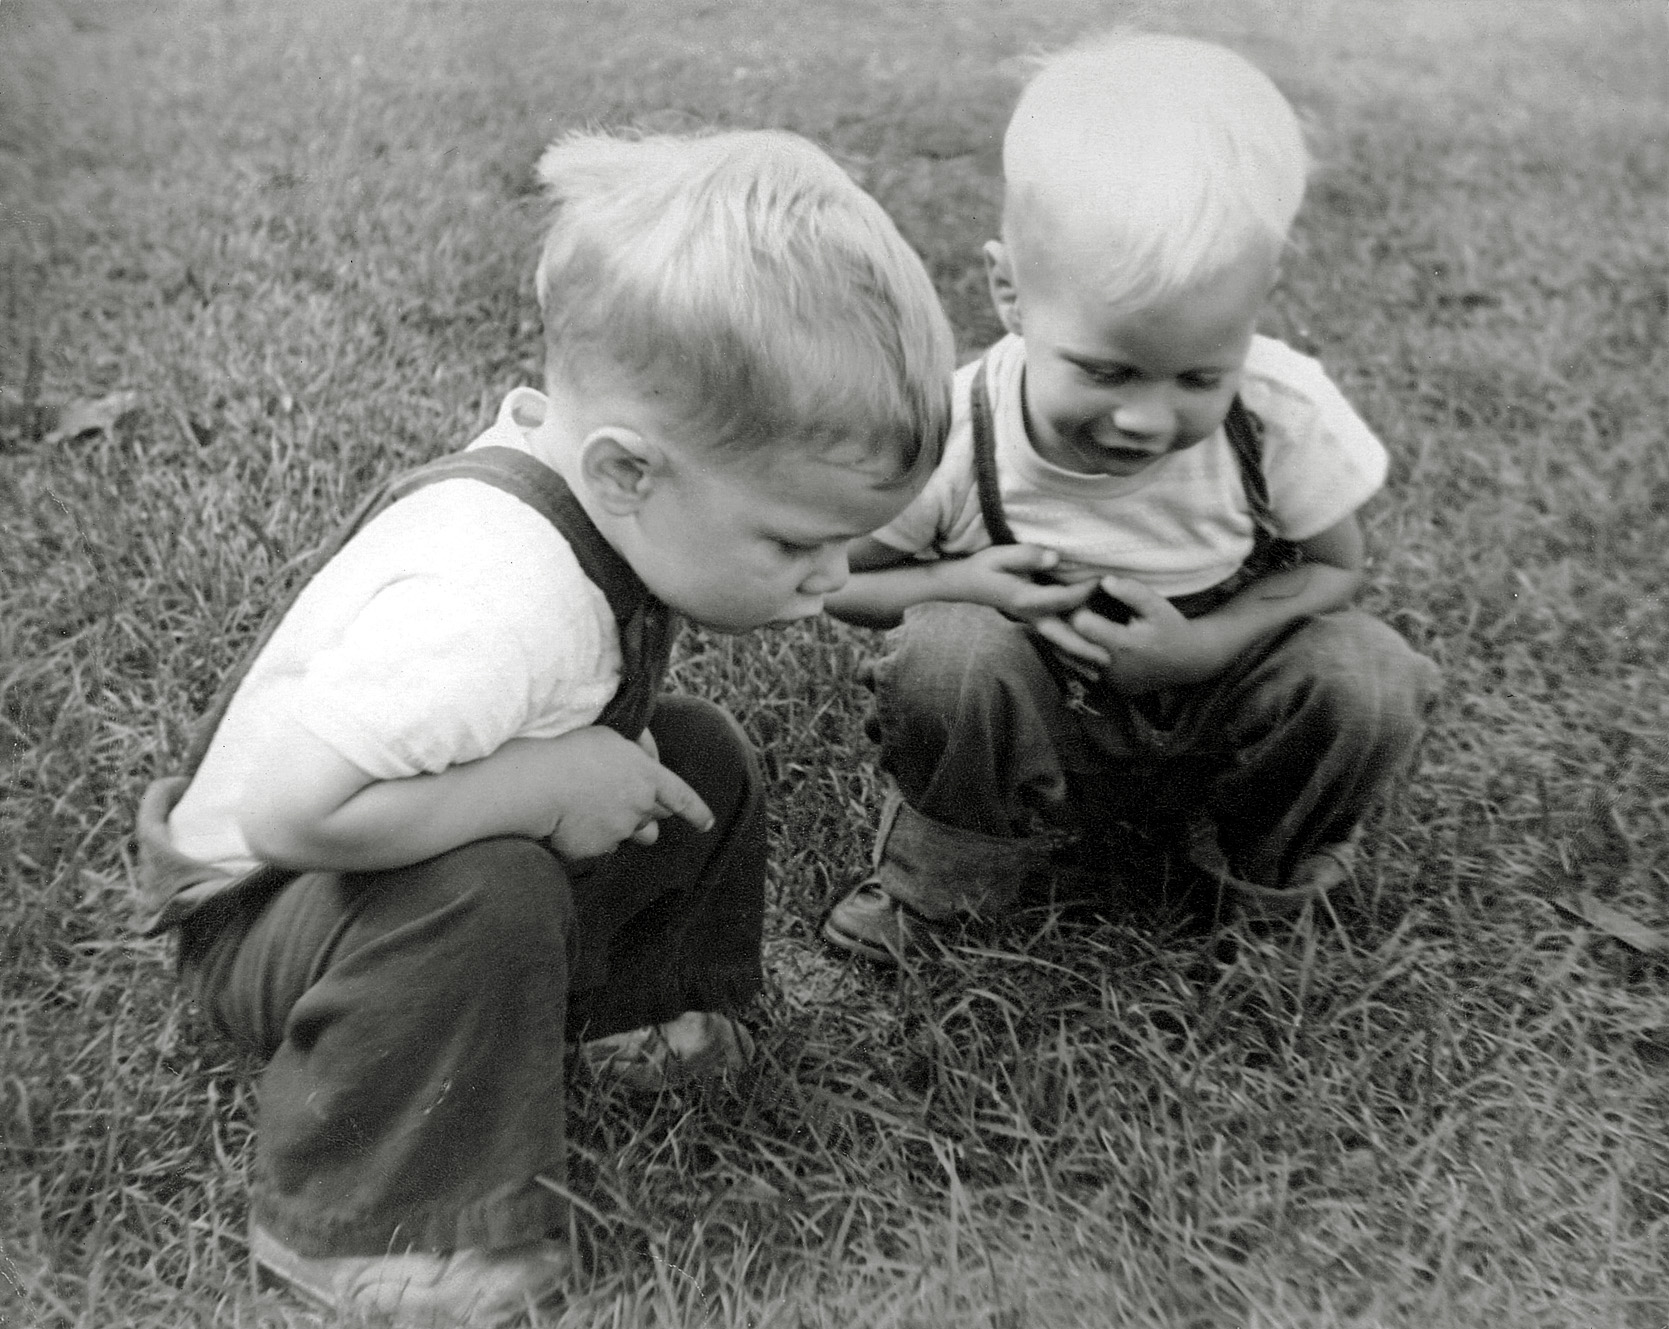 No one remembers what we were looking at, but Dad came away with a great photo. I’m the guy on the right and just turned two in the summer of 1949. Our neighbor from down the street is on the left. We were living in Rochester, New York at the time of this photo. View full size.